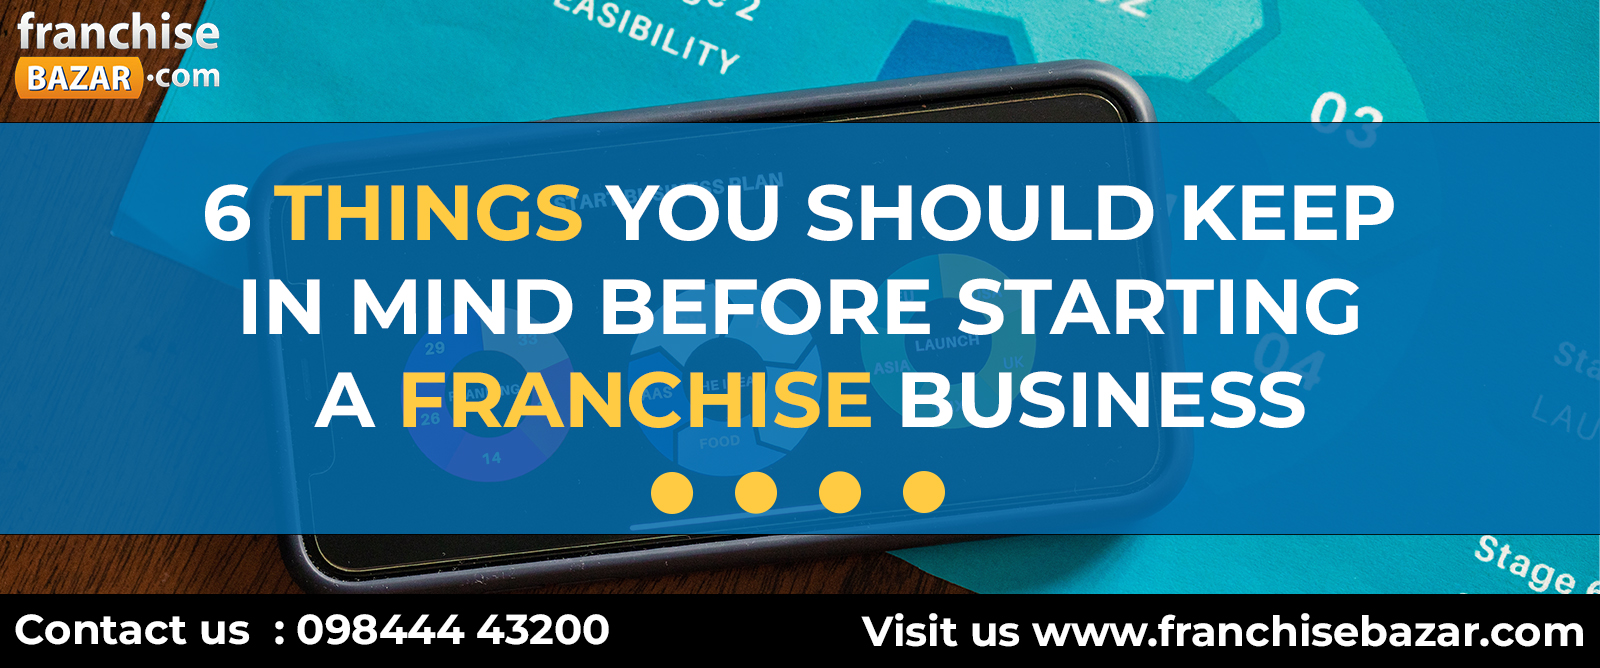 6 Things You Should Keep In Mind Before Starting A Franchise Business 